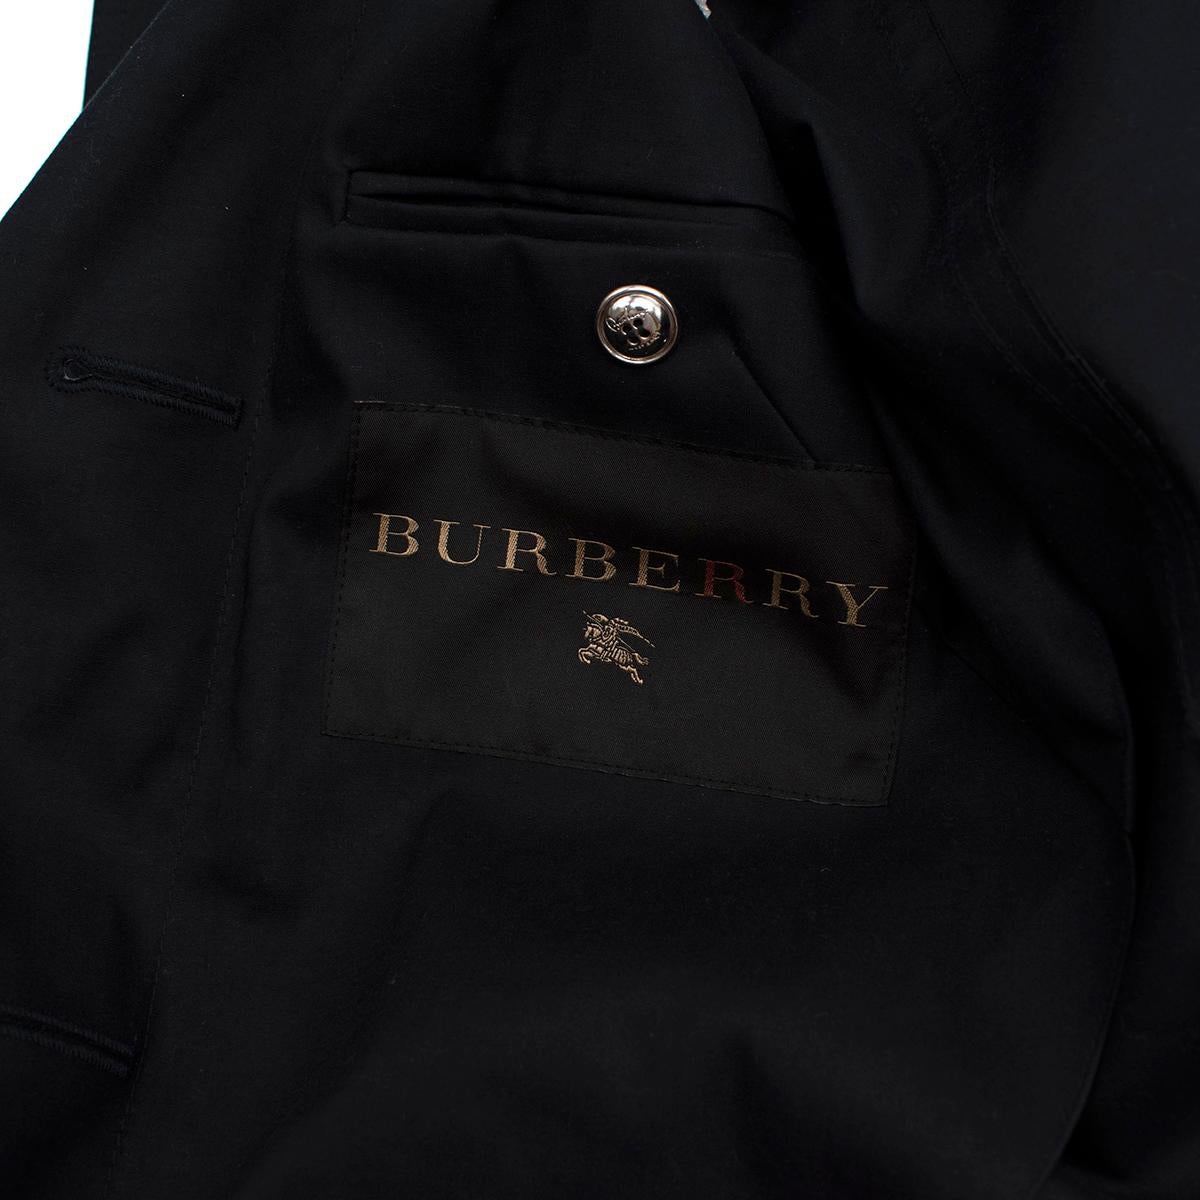 Burberry Navy Trench Coat with beaded details - Us Size 6 For Sale 1